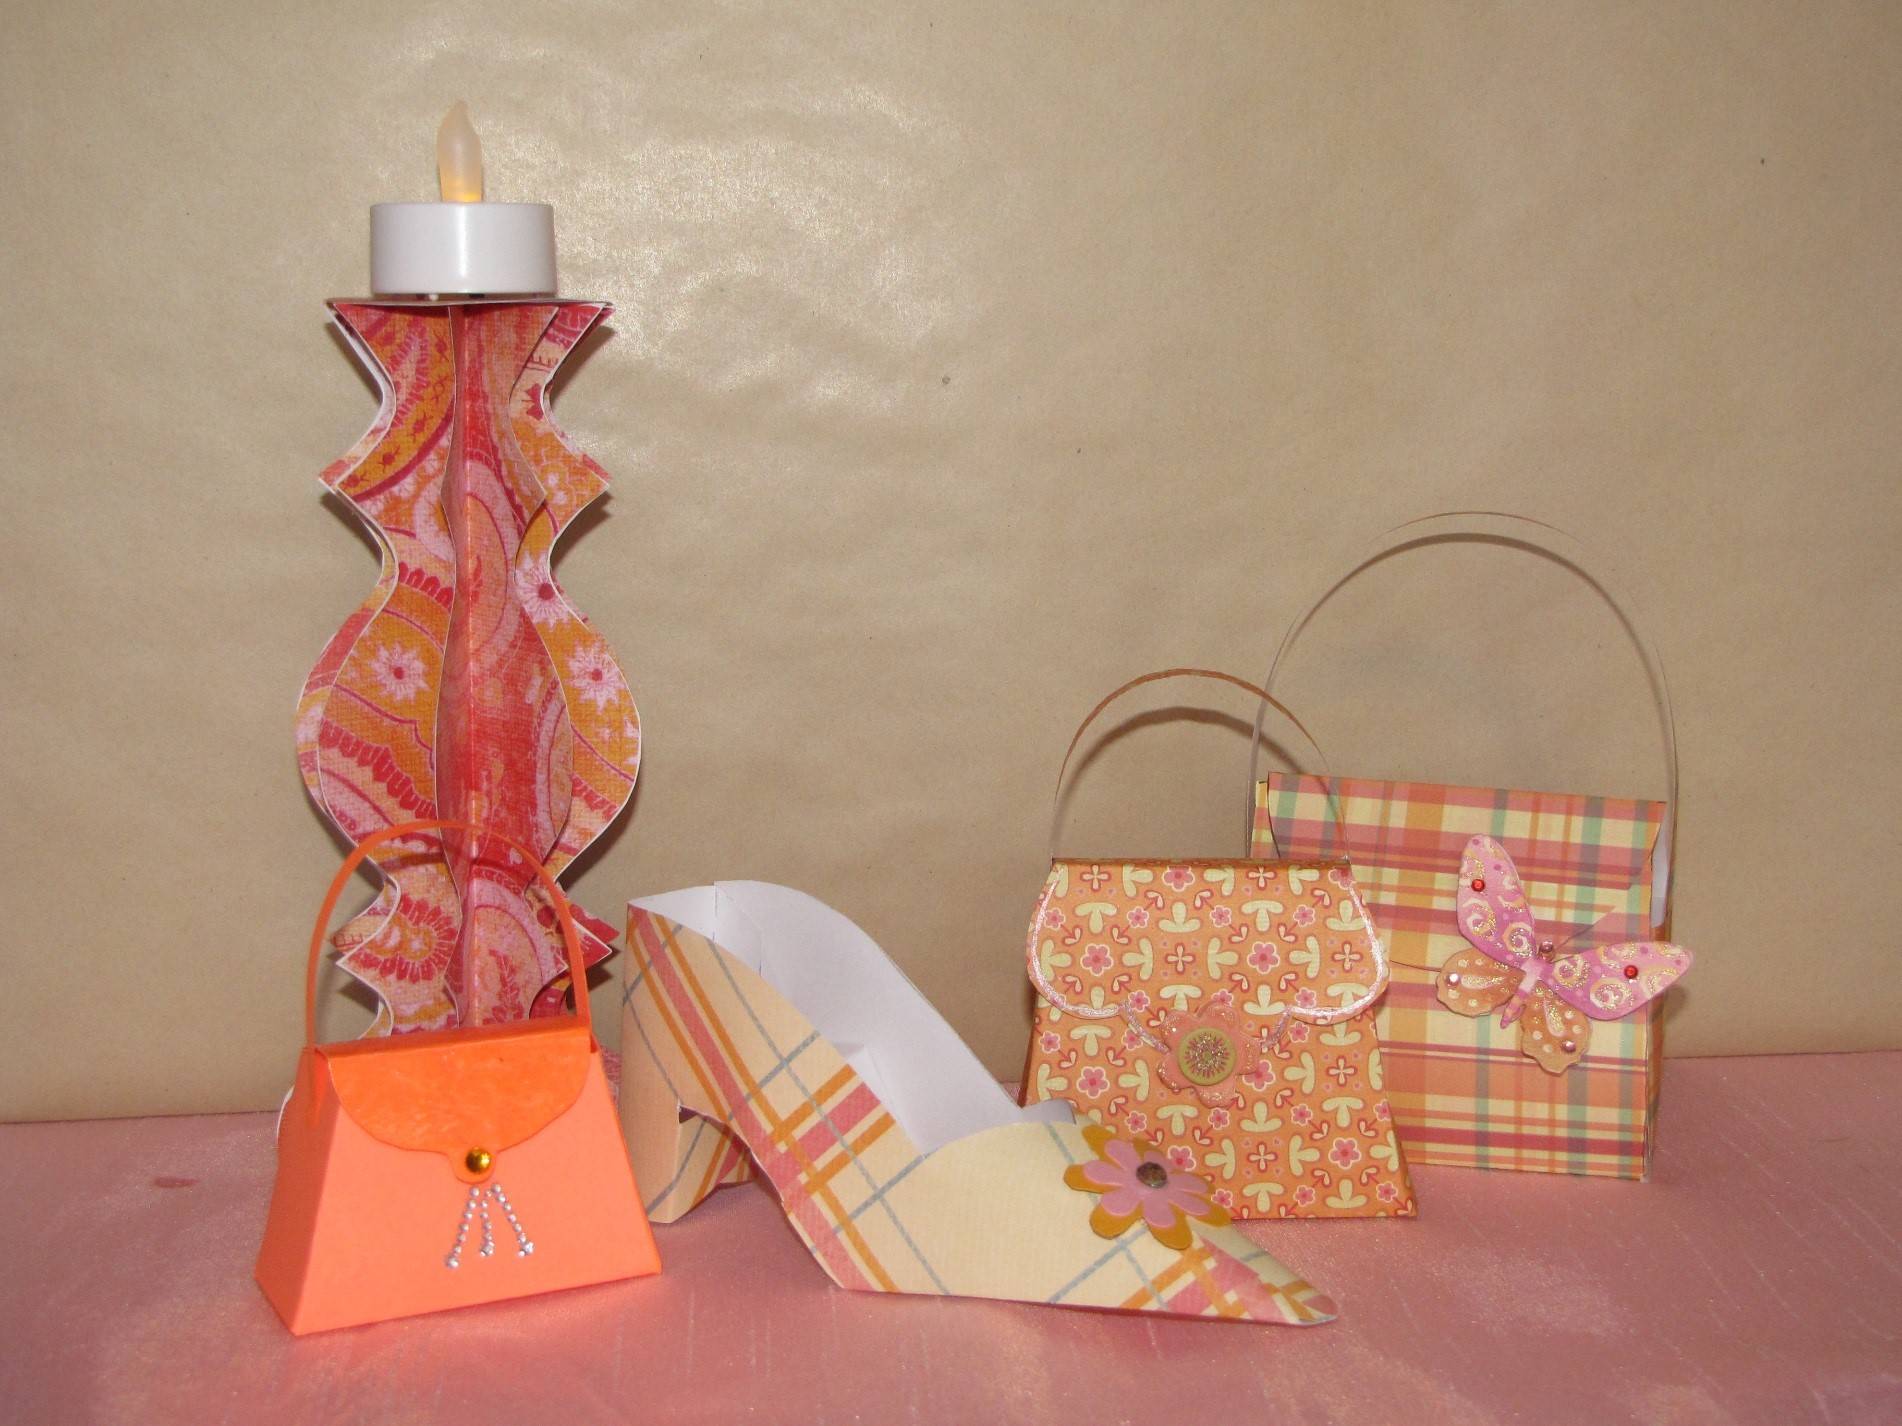 Mother's Day Craft - 3 Purses, Shoe and Candlestick Holder